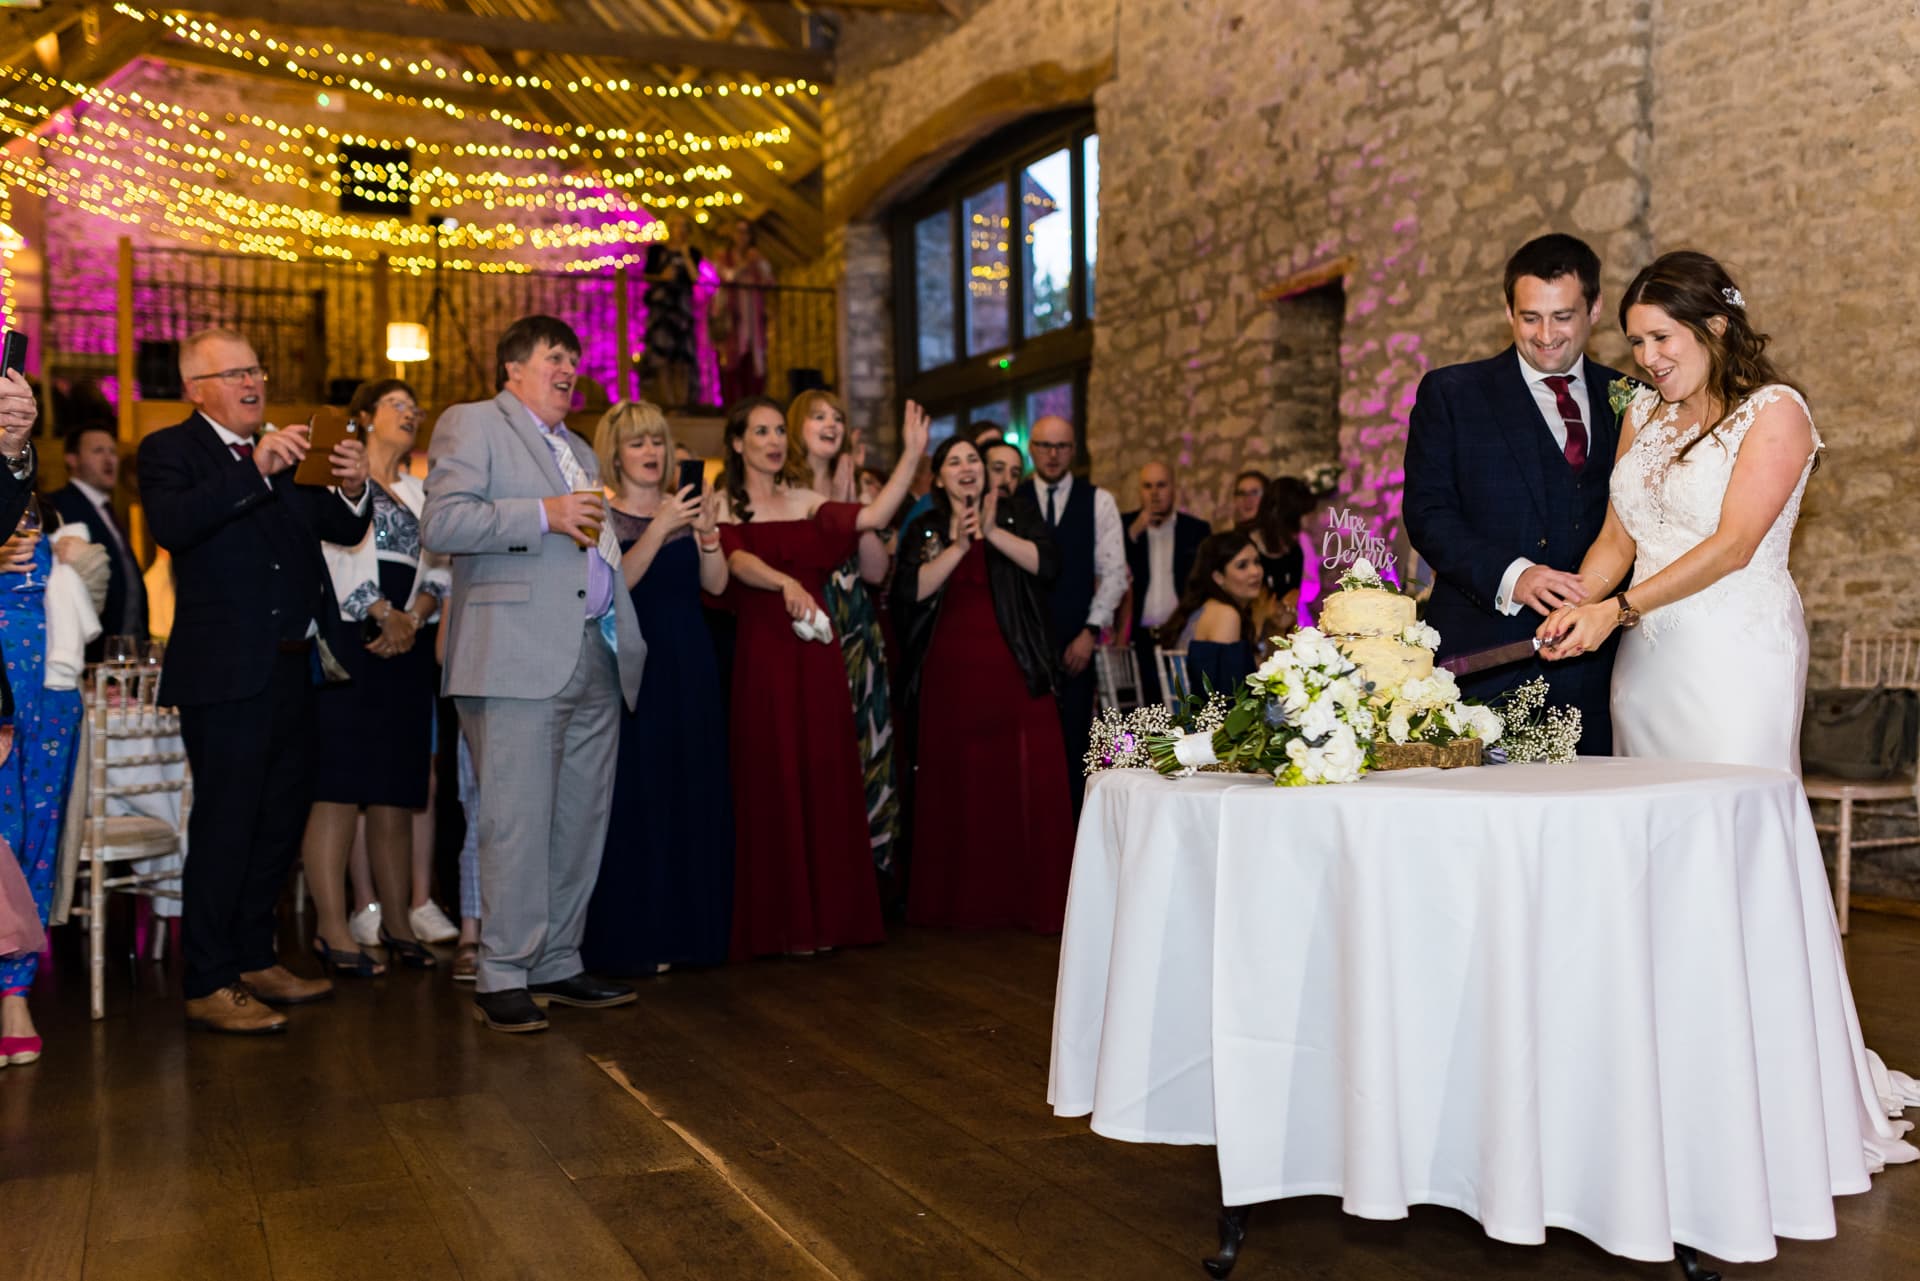 bride and groom cutting cake in barn